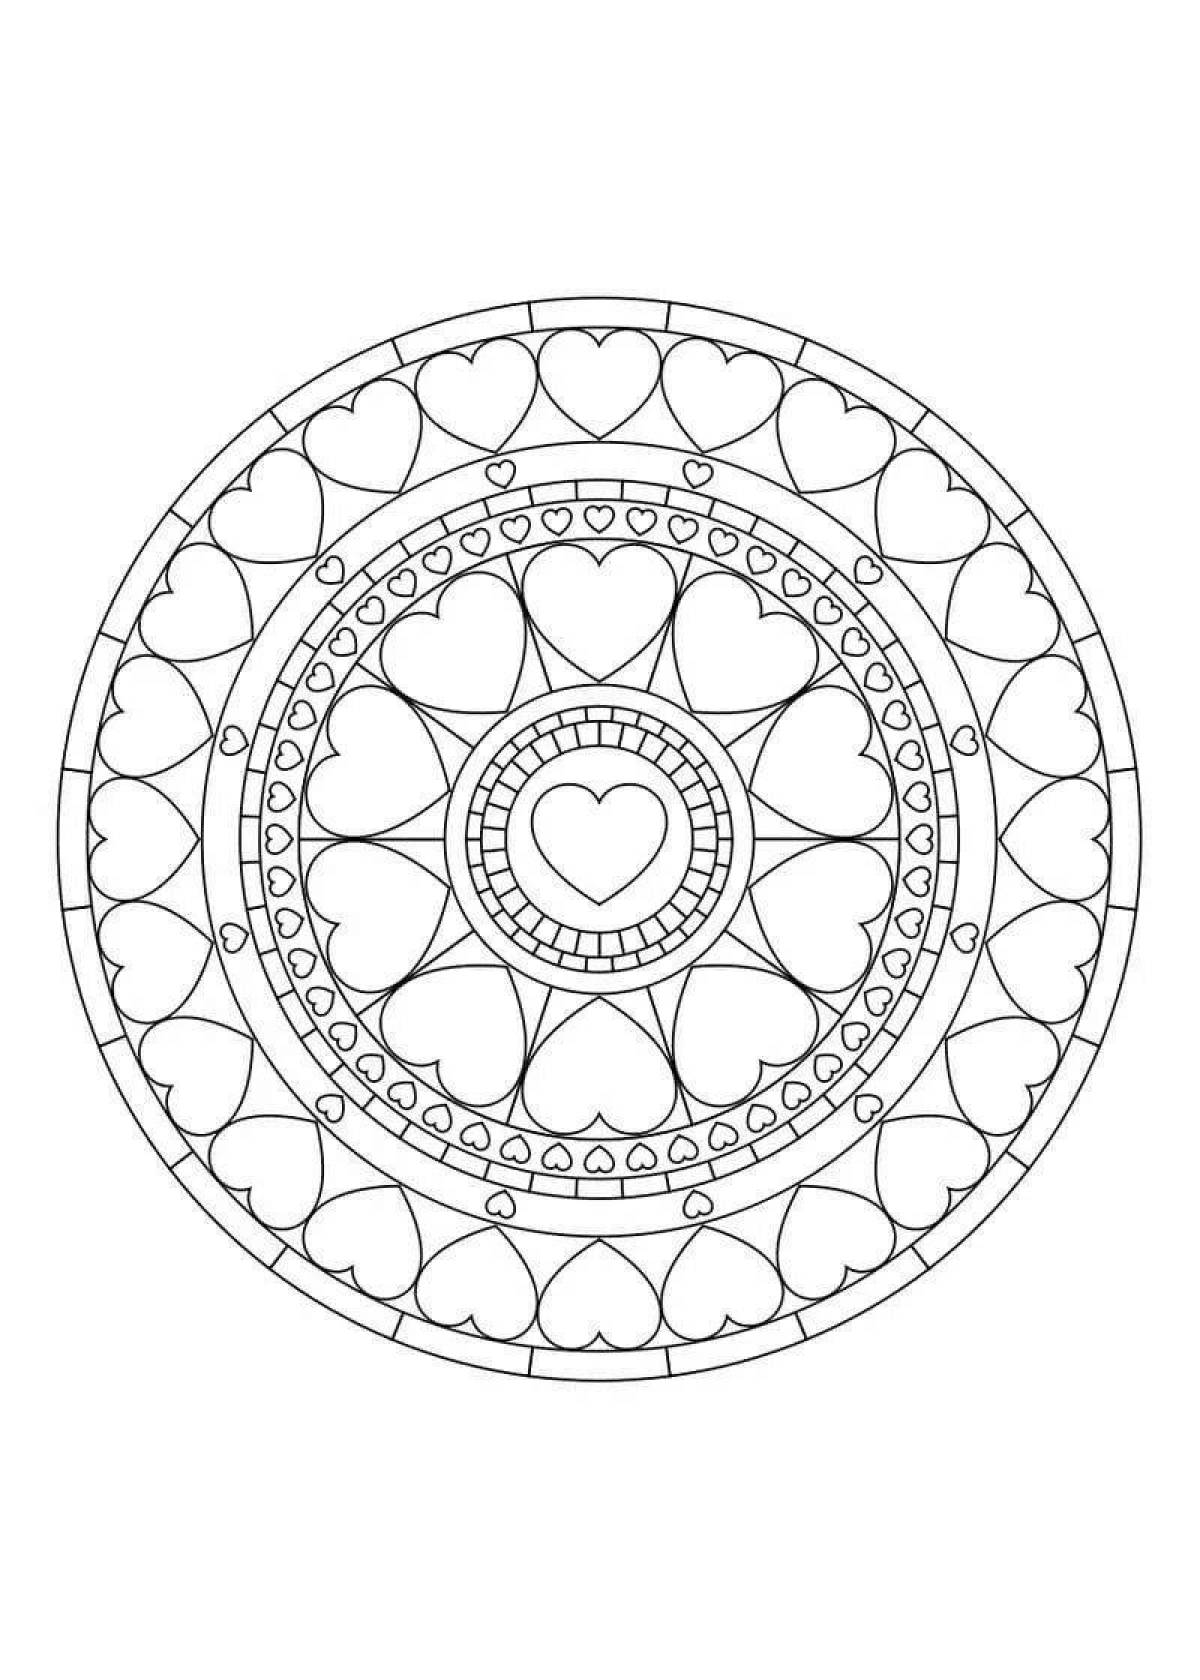 Radiant coloring page circle of life готовая работа